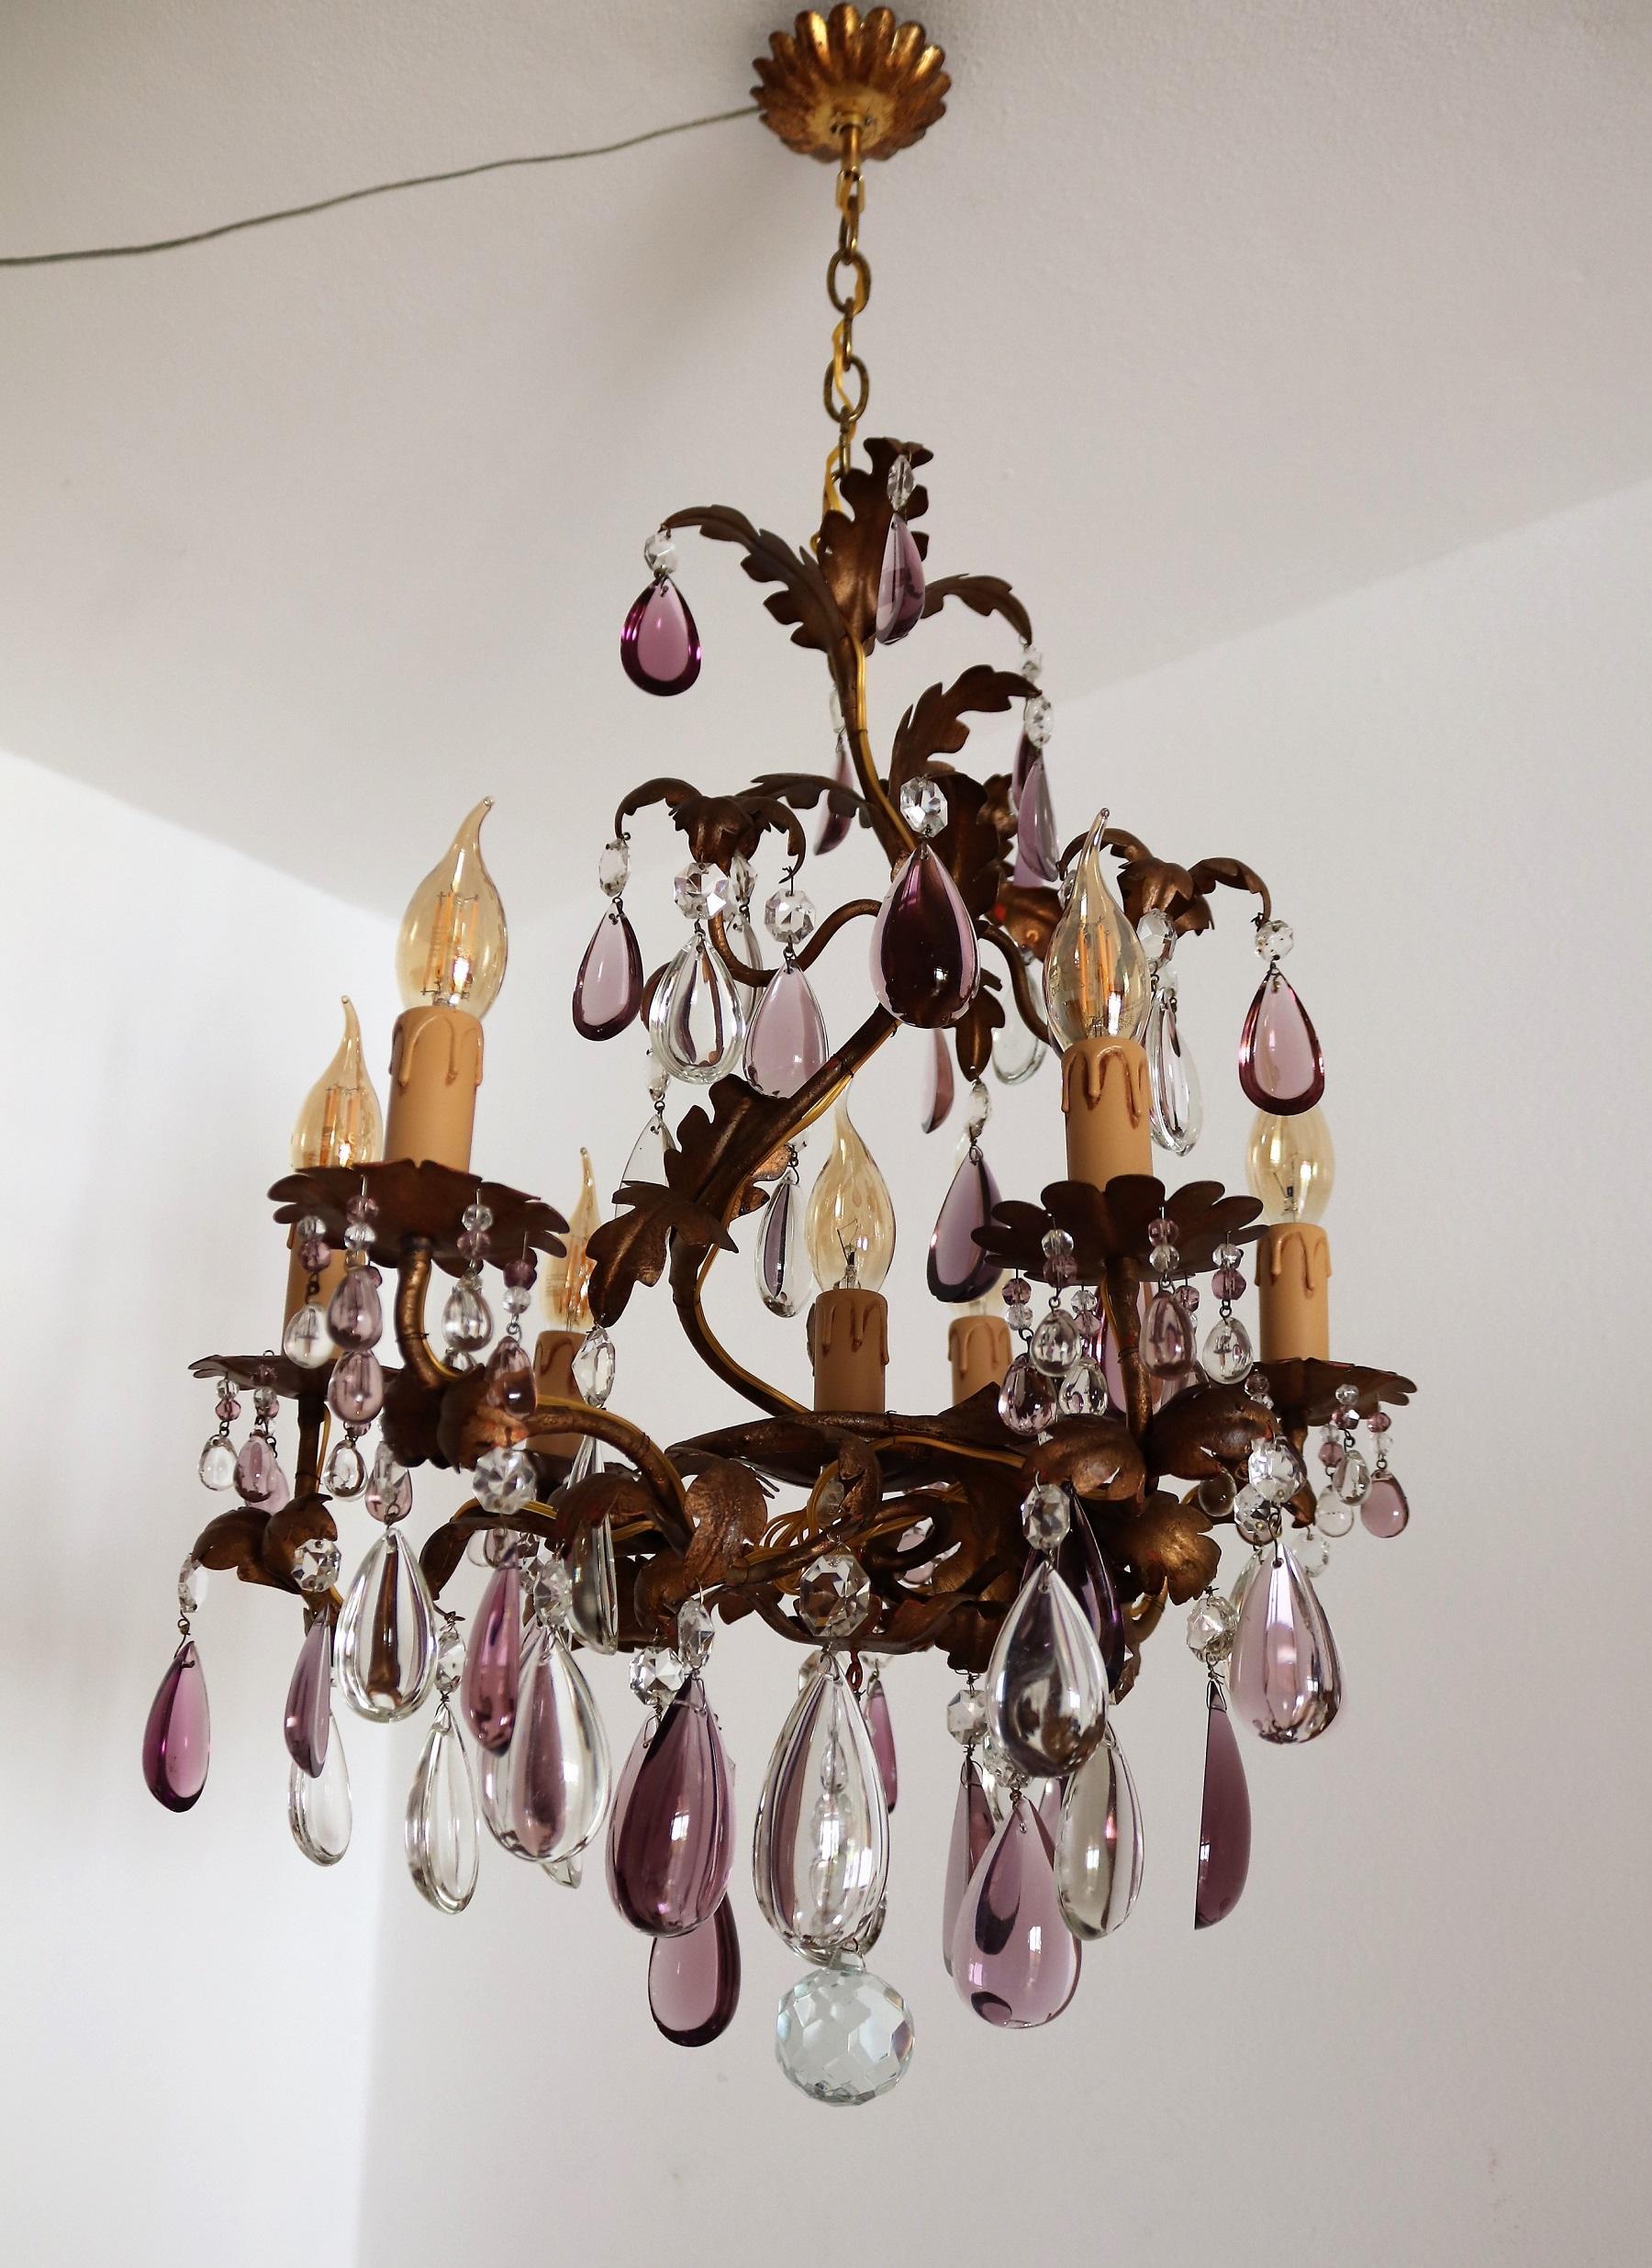 Gorgeous Chandelier in the shape of a tendril with Leaves.
Made in Italy in the 1950s. 
The chandelier is made of strong, partially gilt metal and has 7 light bulbs for small size bulbs.
The purple and transparent drops are original old Murano